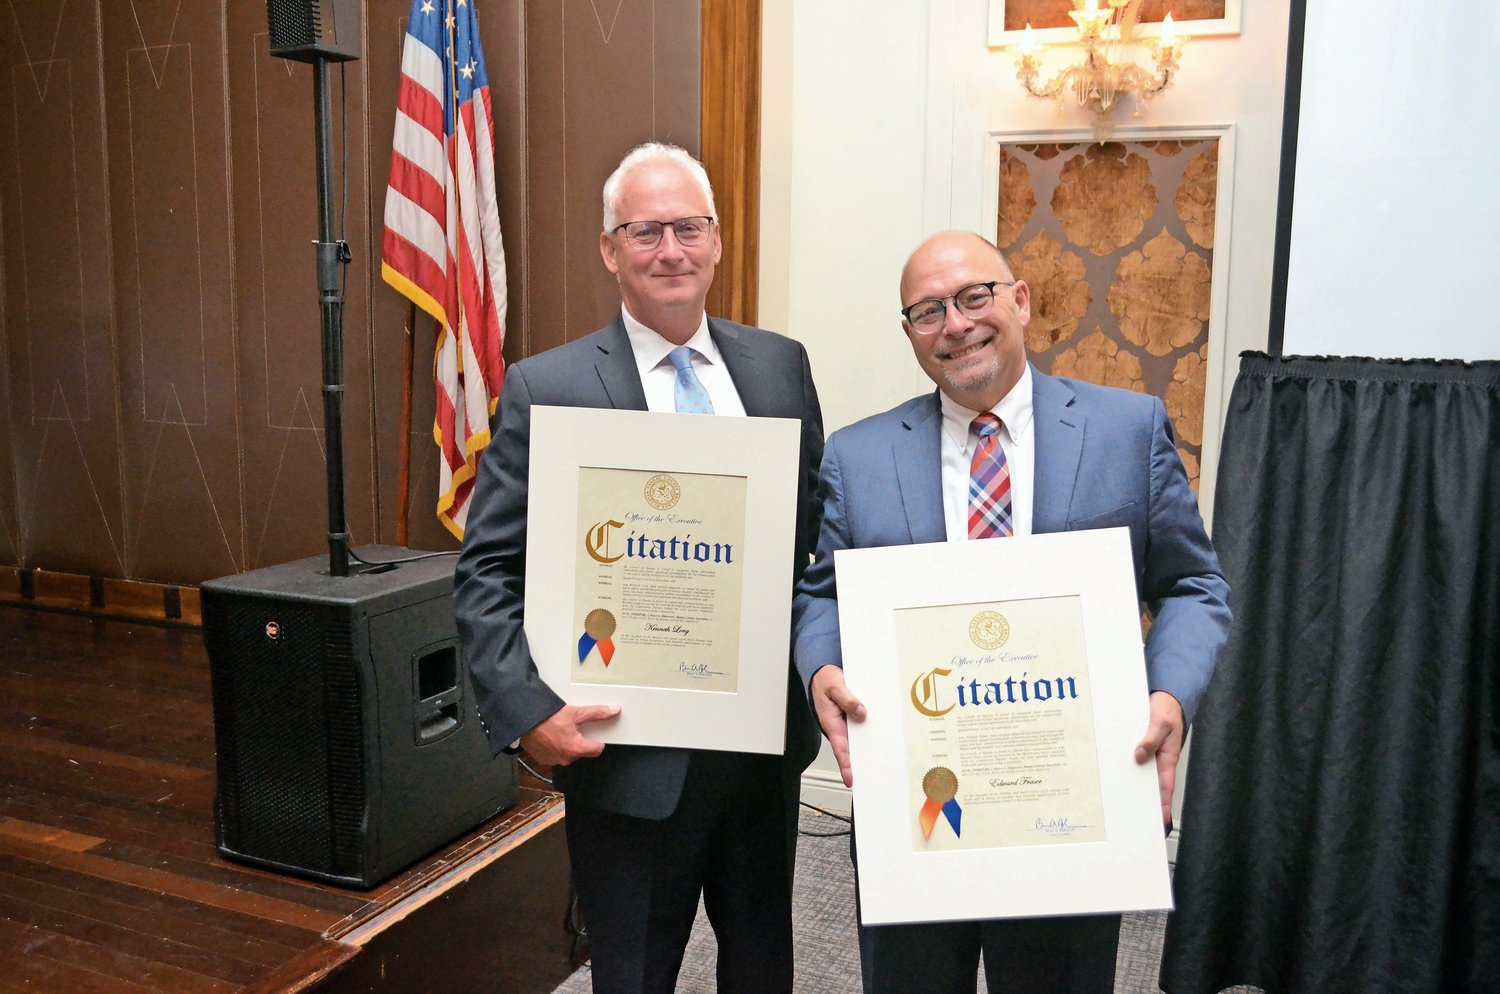 Kenneth Long, left, and Edward Fraser, the Community Partner Award winners, showed off their Nassau County citations.